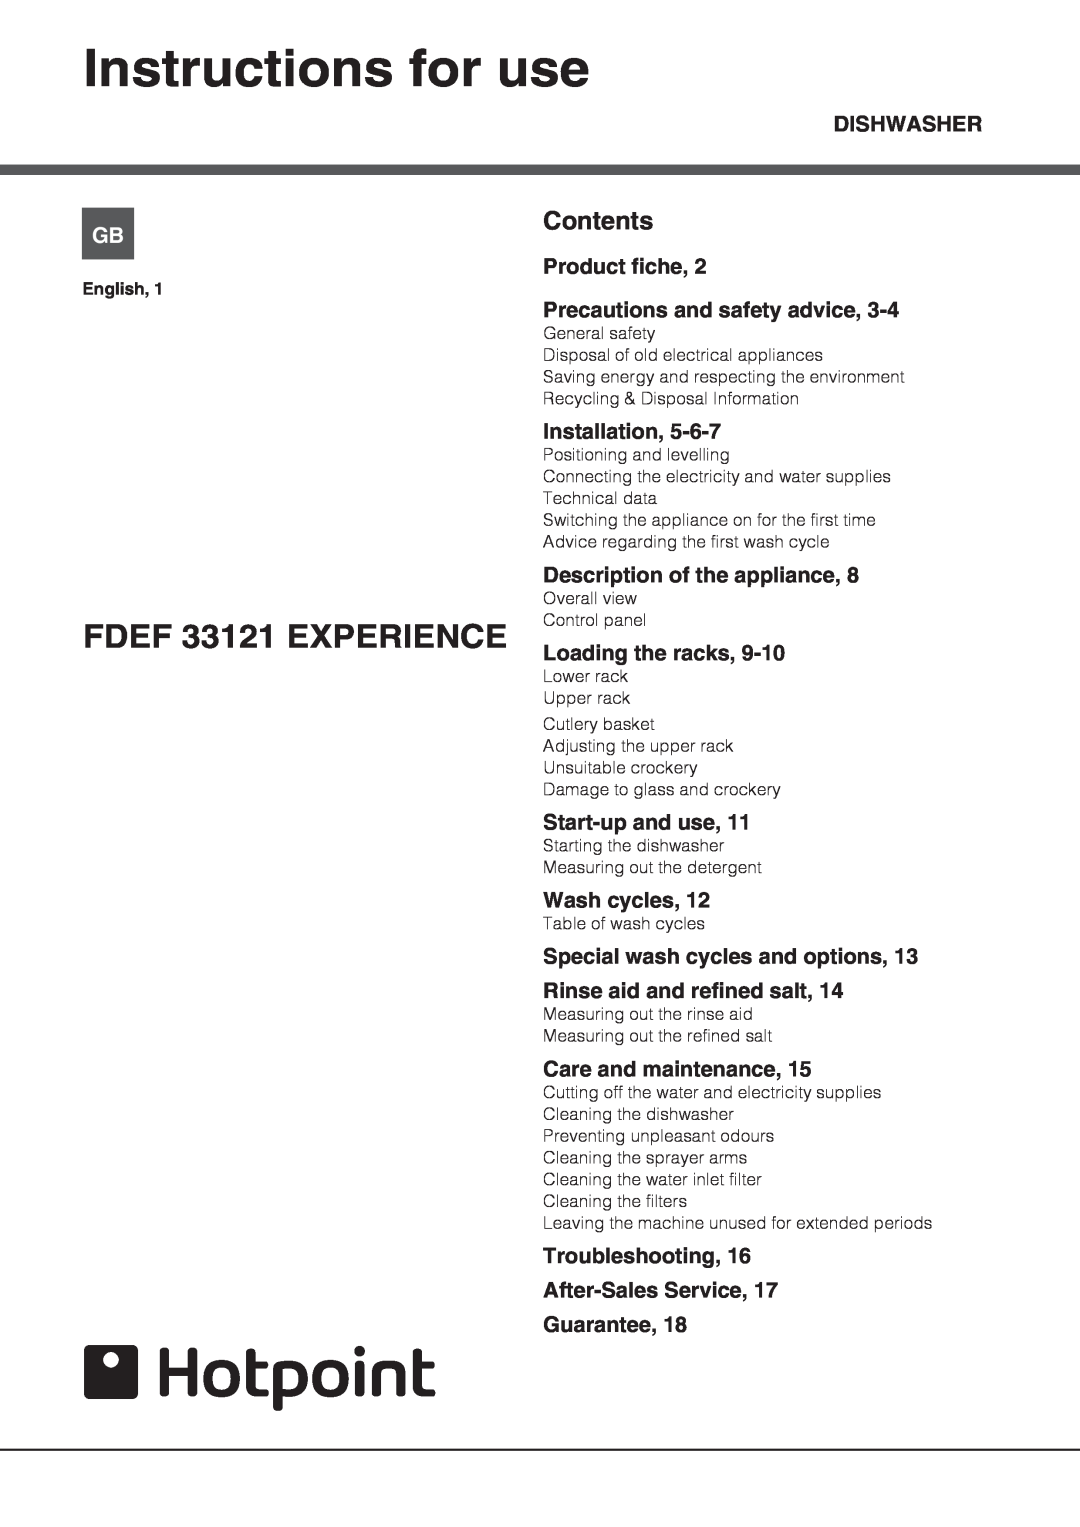 Hotpoint manual Instructions for use, FDEF 33121 EXPERIENCE, Contents 